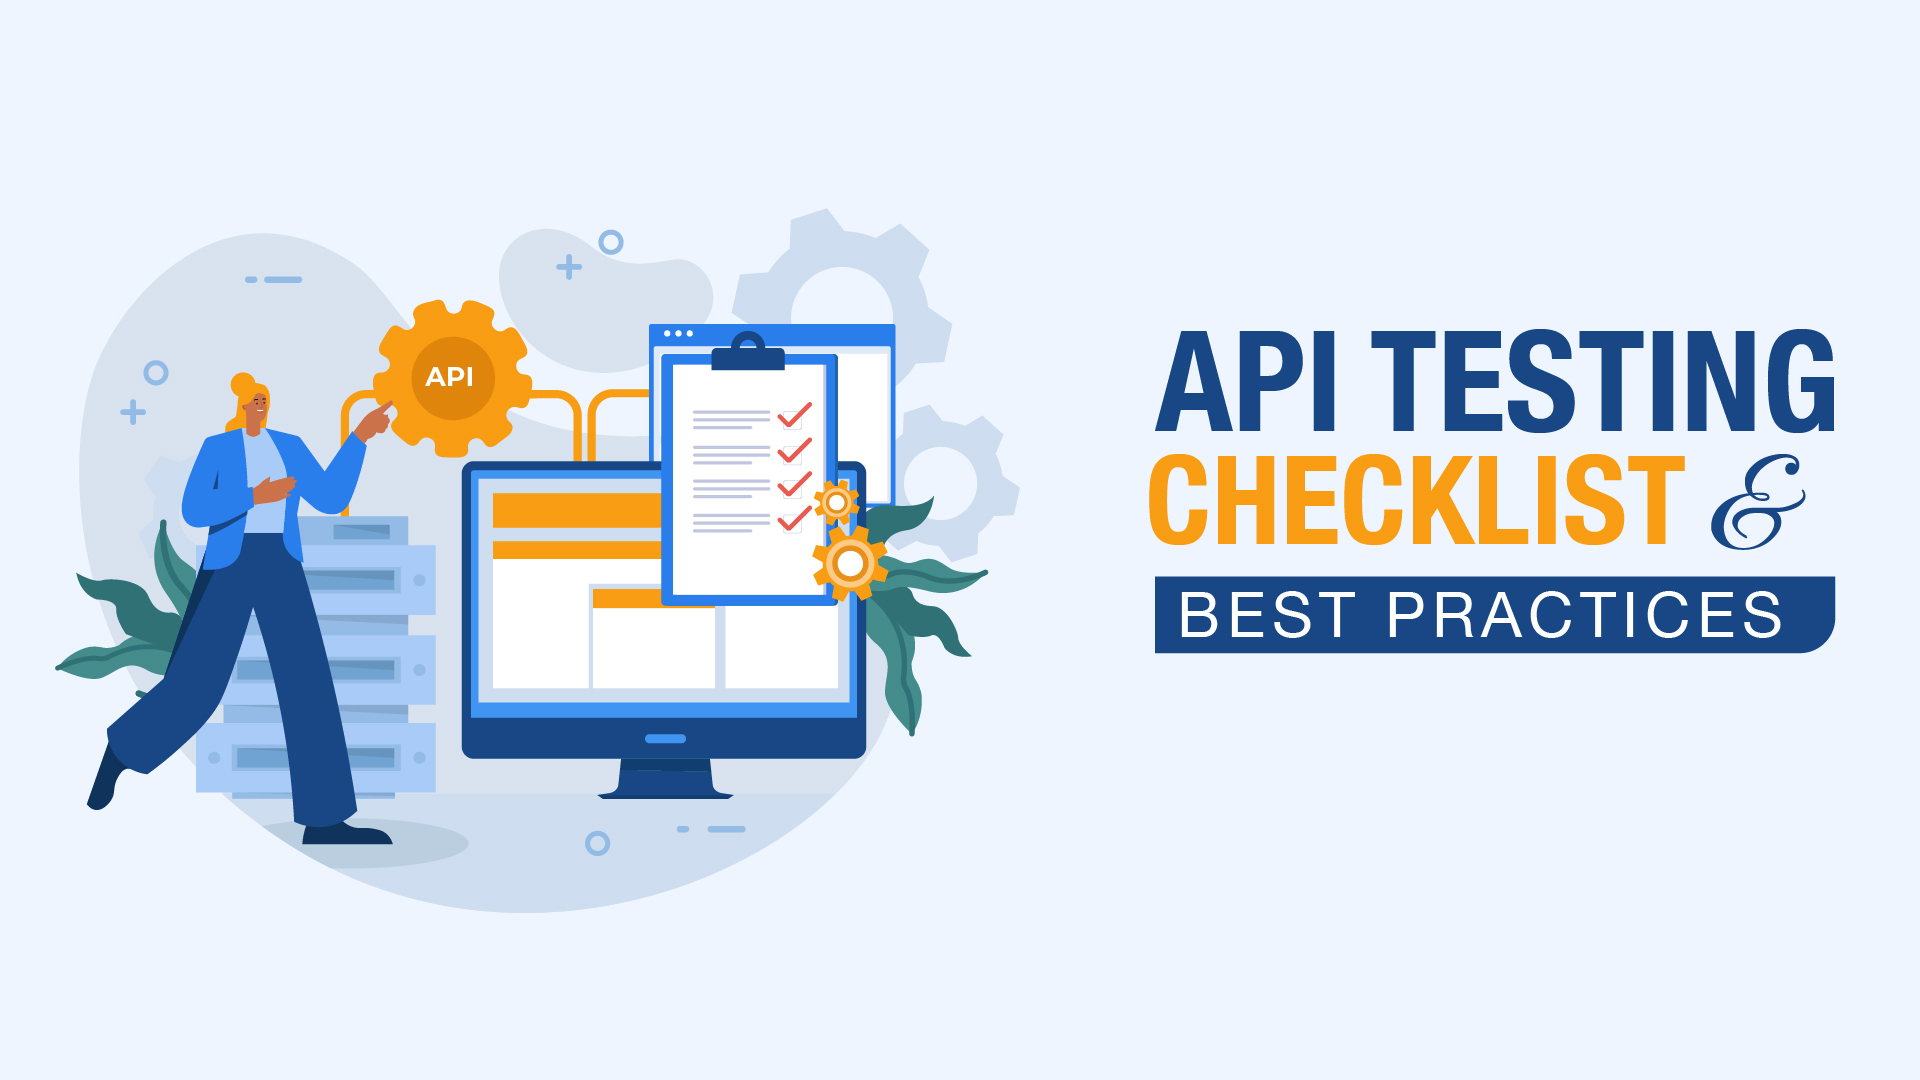 API Testing Checklist and Best Practices